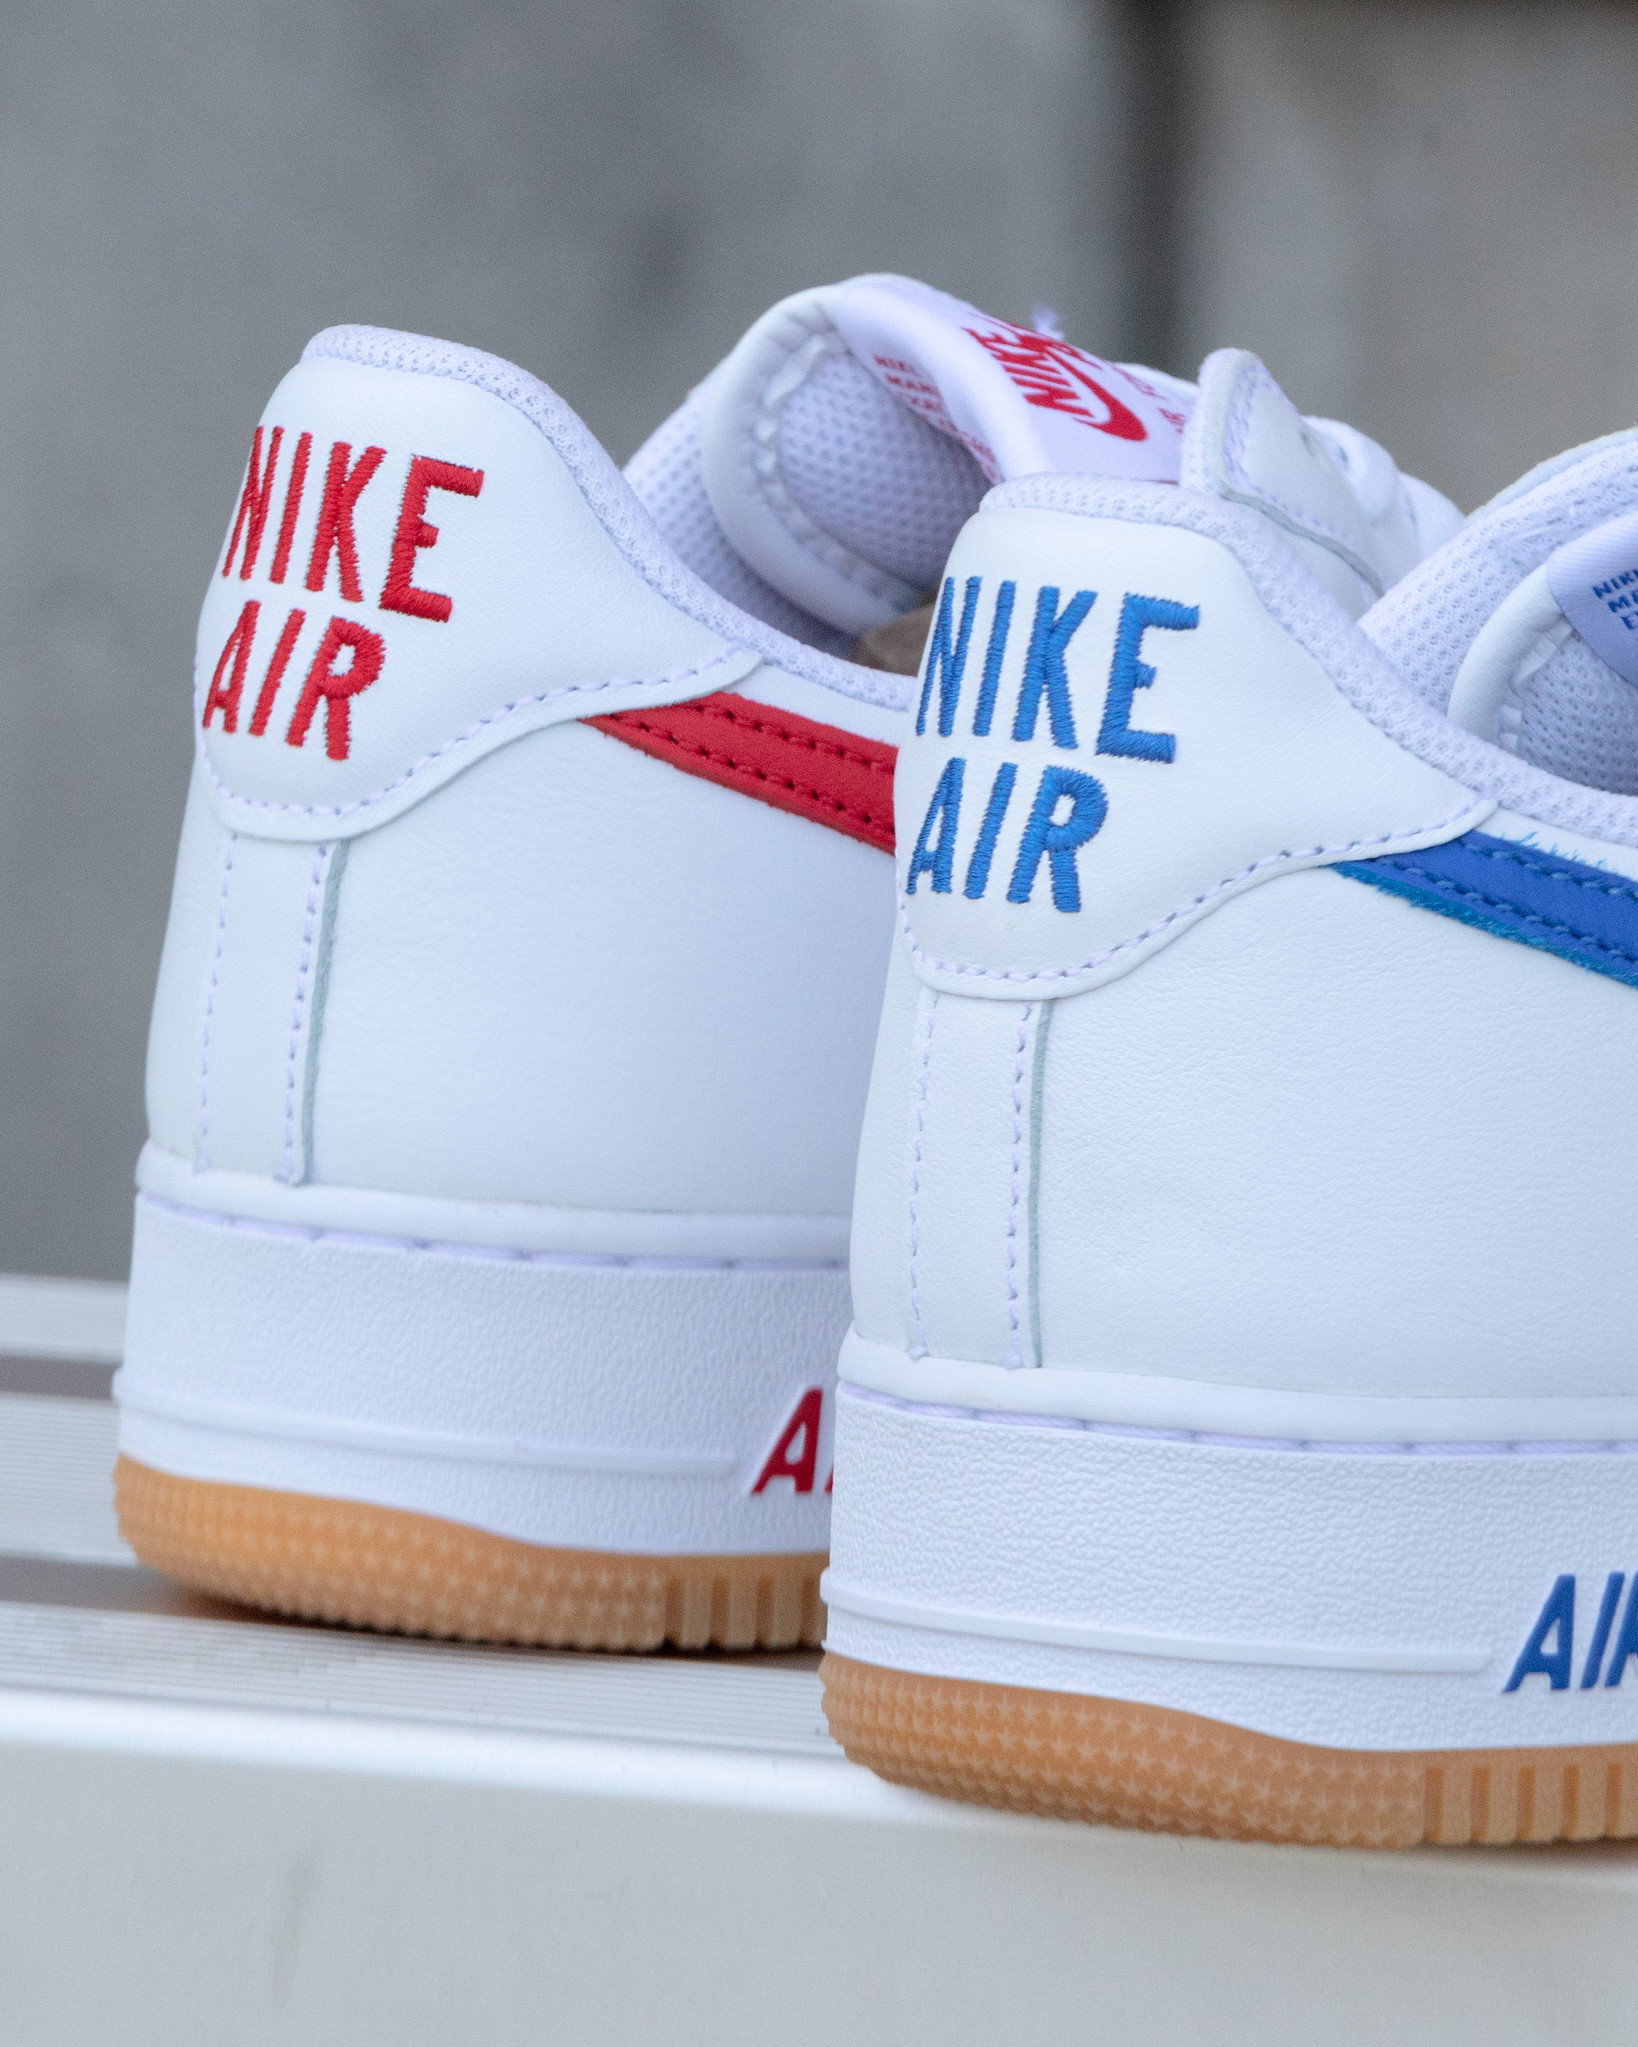 Now Available: Nike Air Force 1 Low What The NYC — Sneaker Shouts